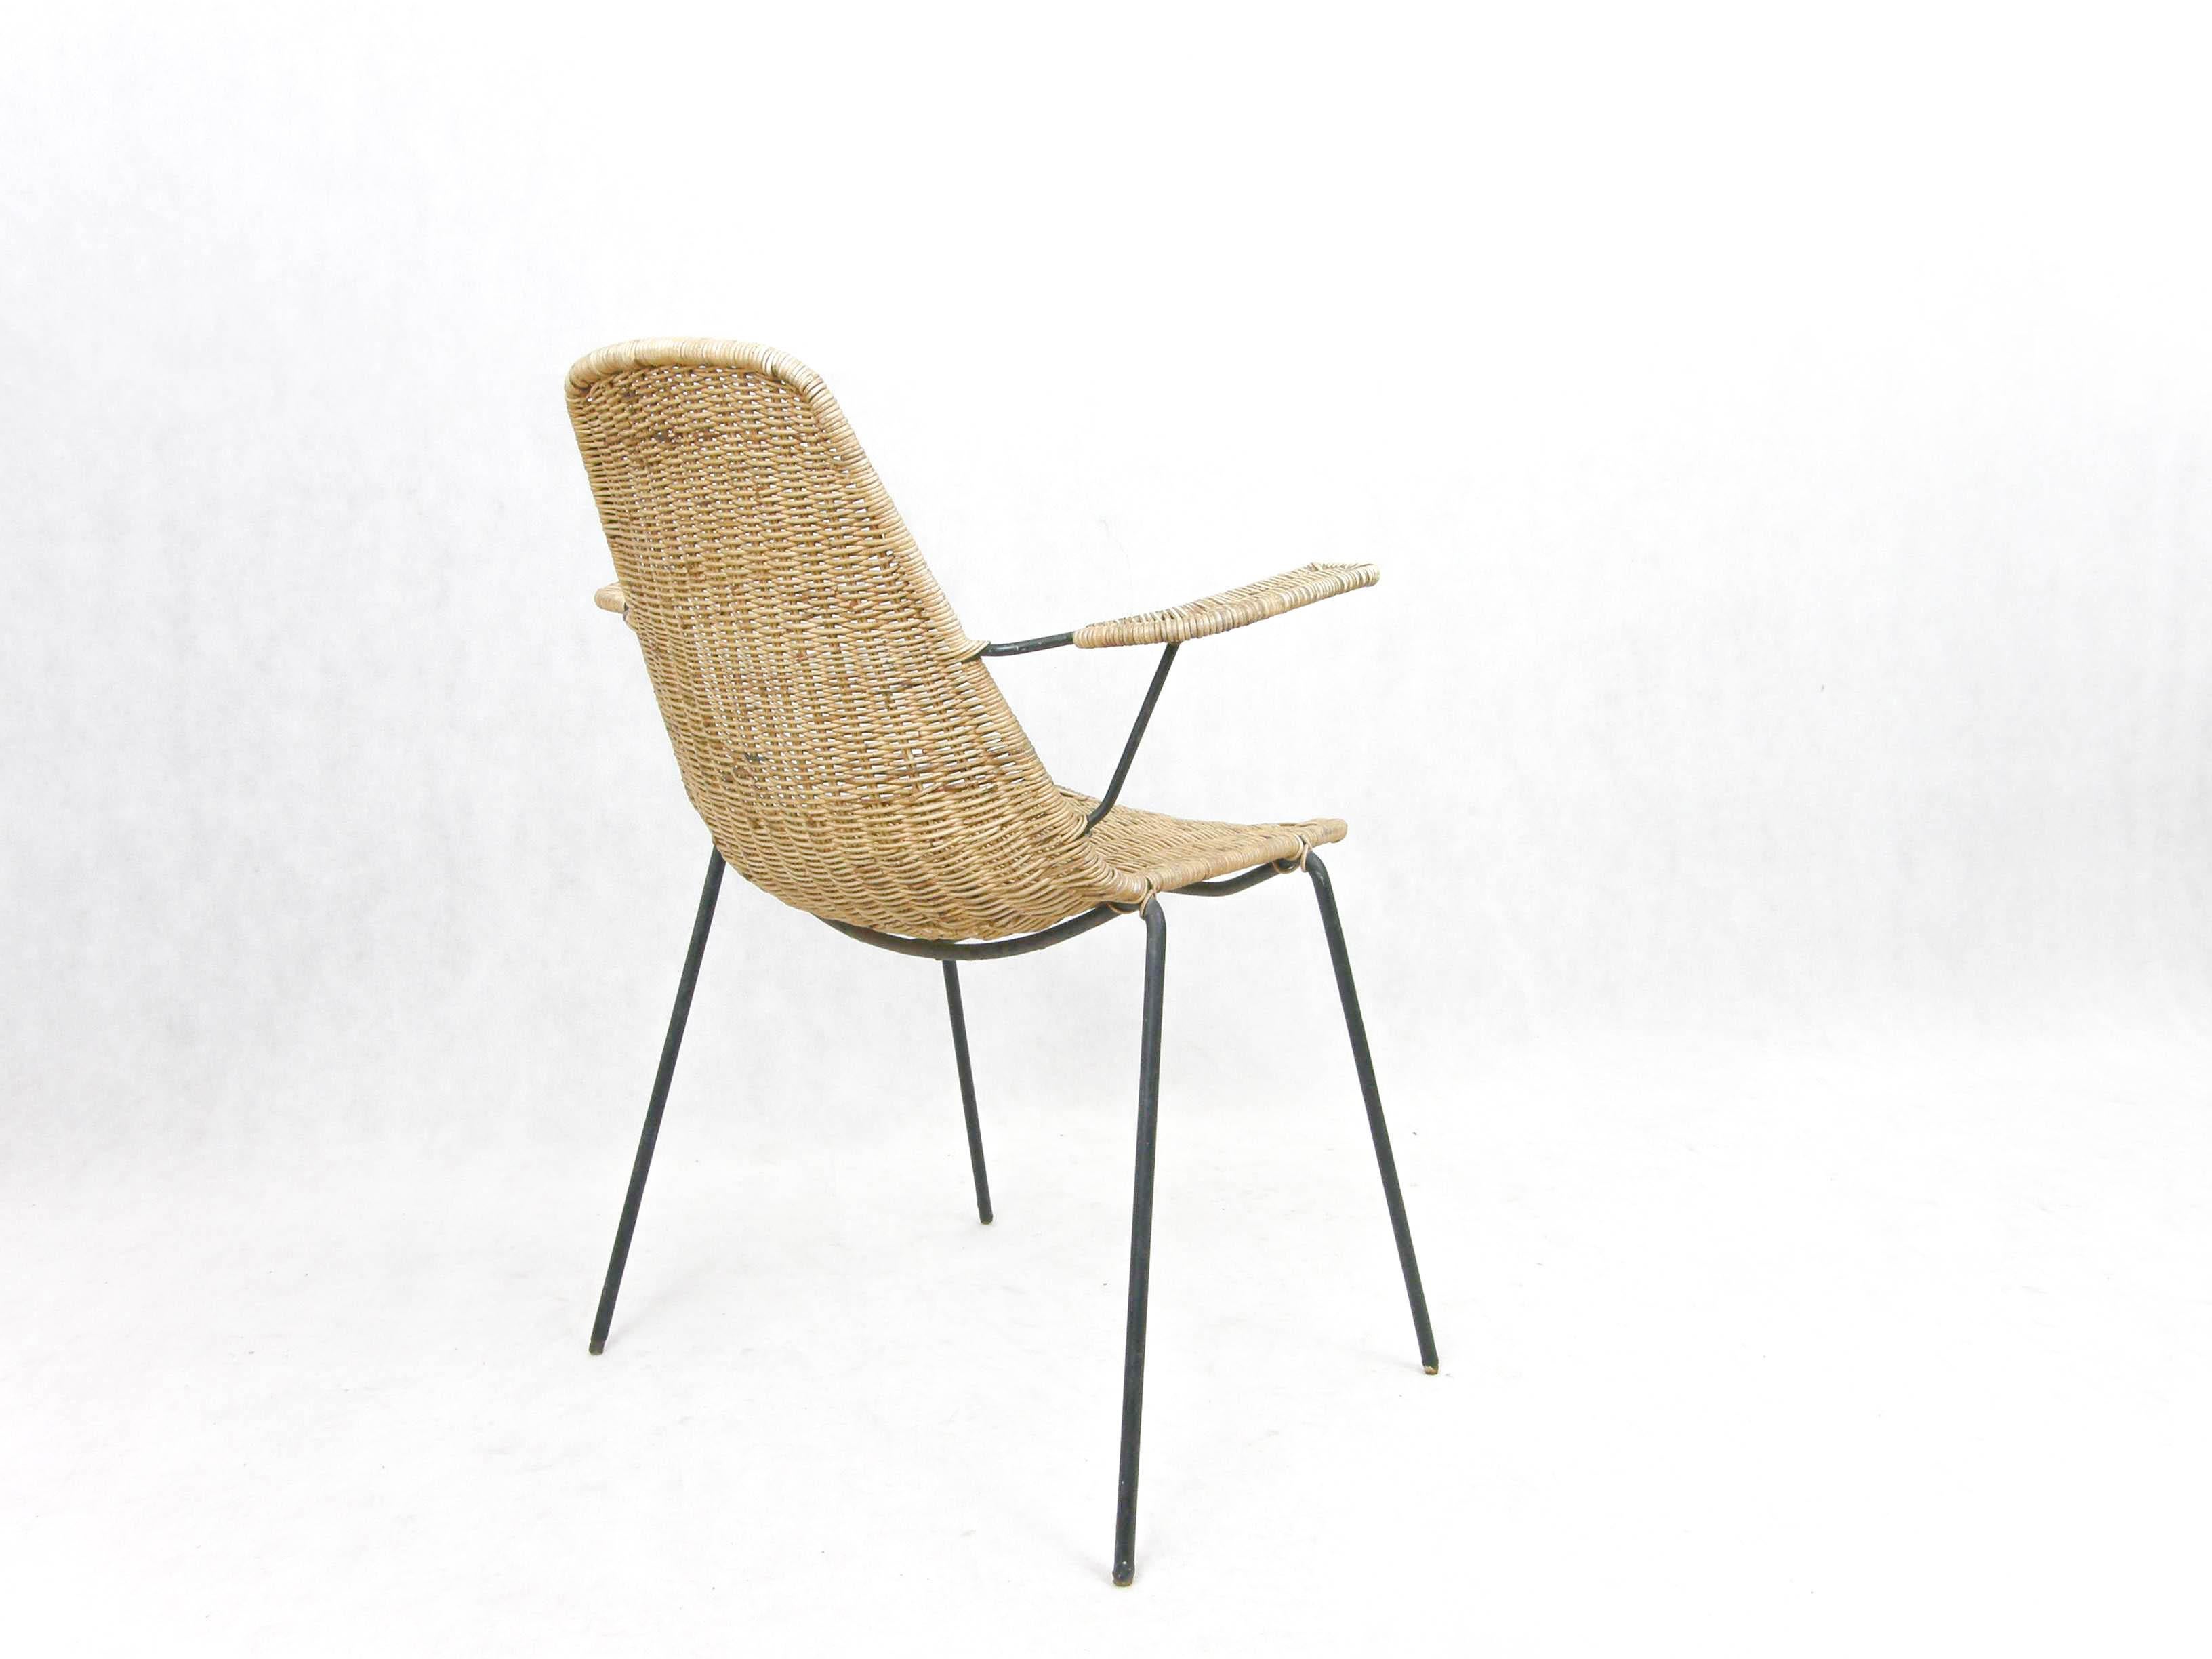 Italian Wicker chair with armrests Campo and Graffi italia 1950s For Sale